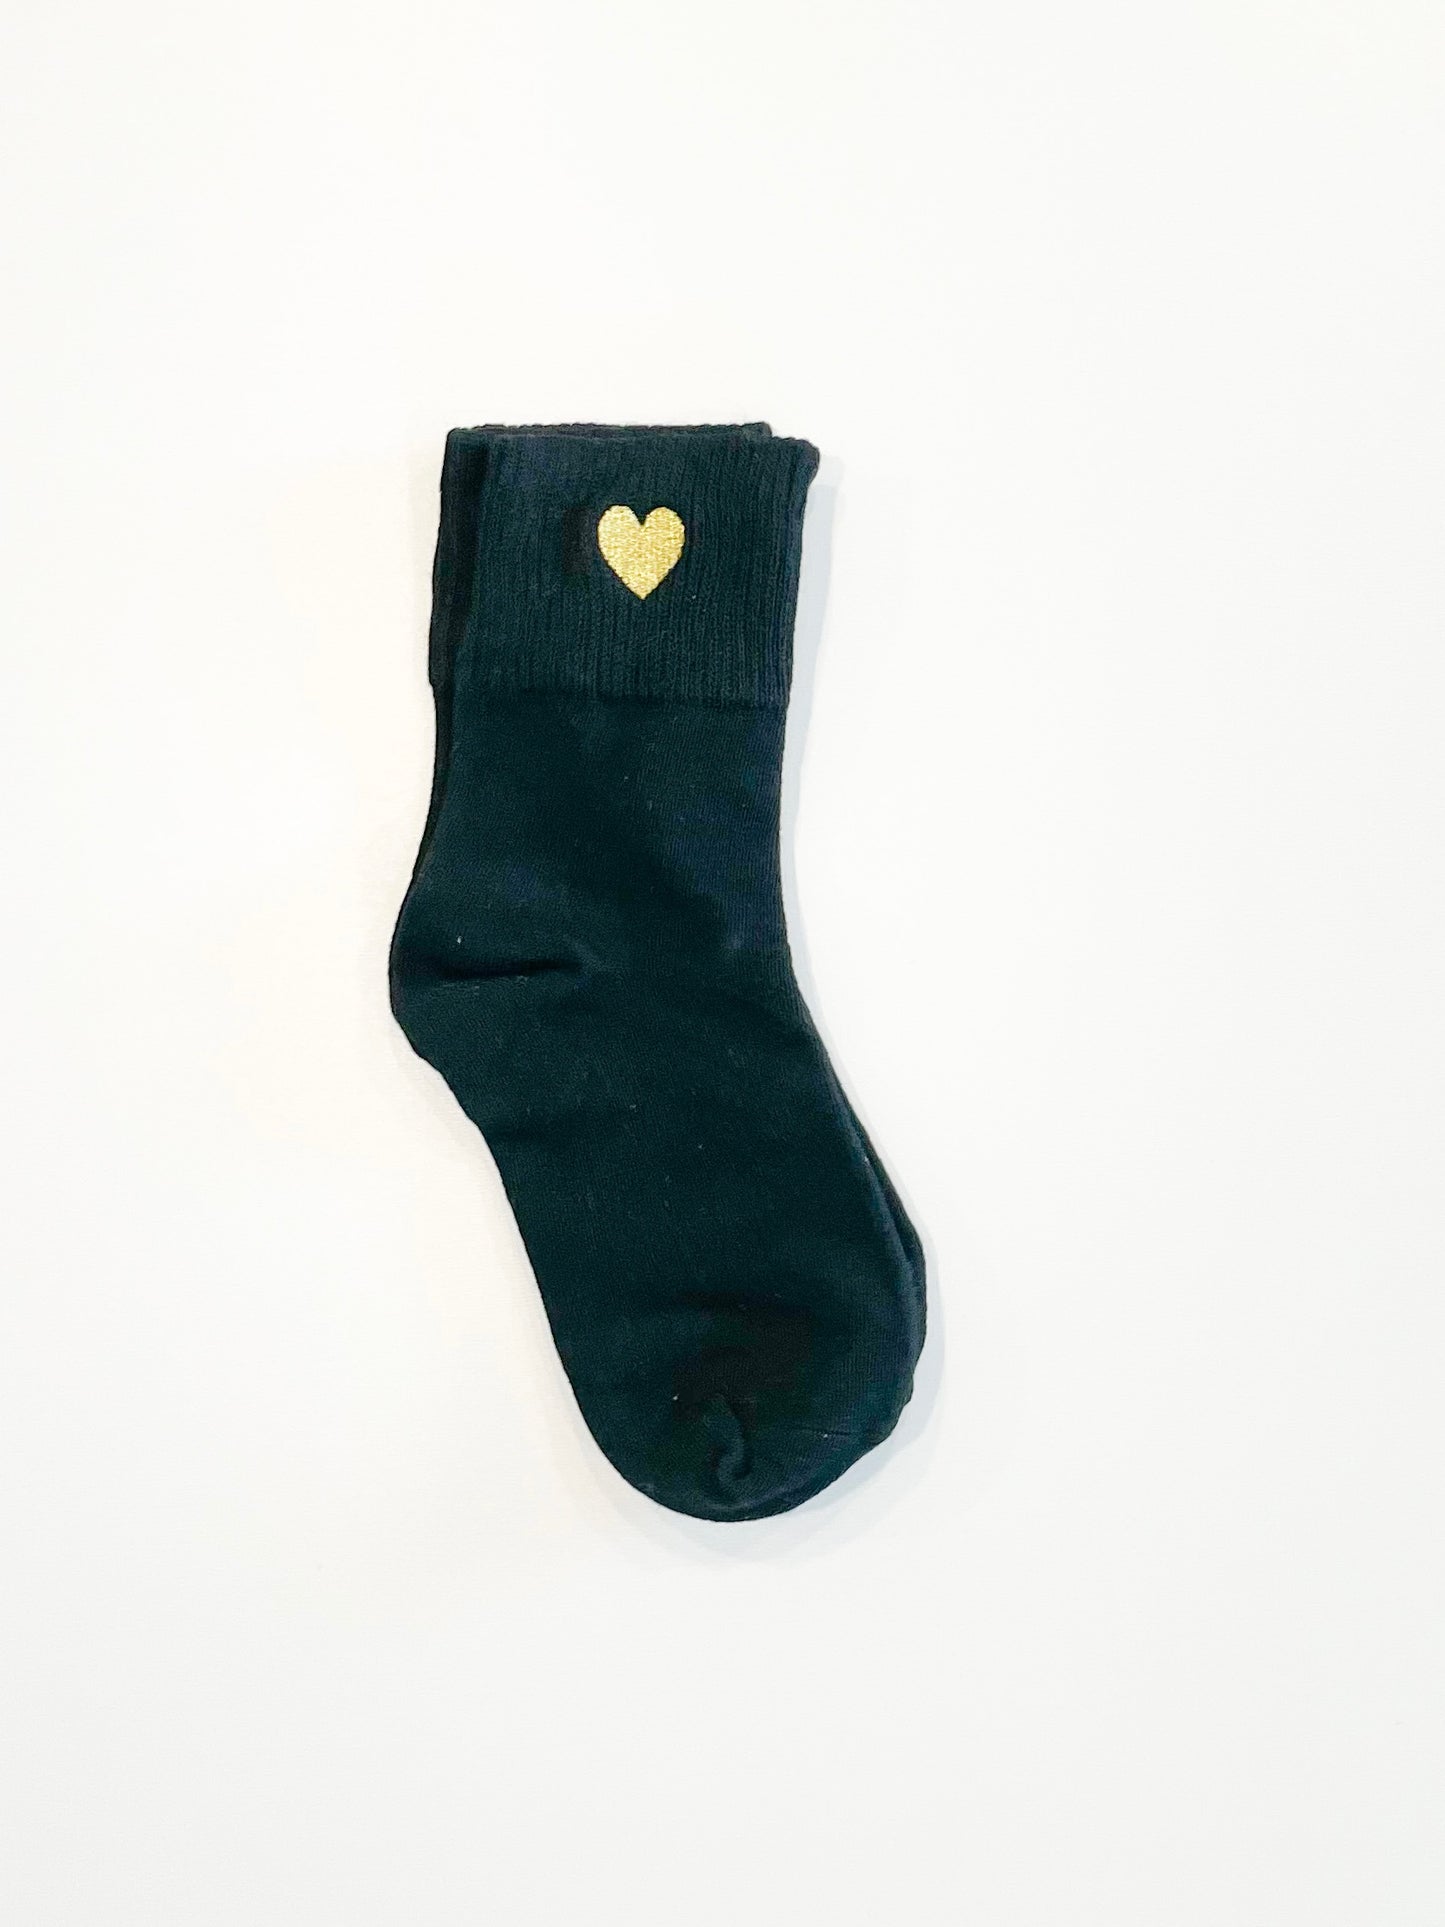 Embroidered Heart Ankle Socks